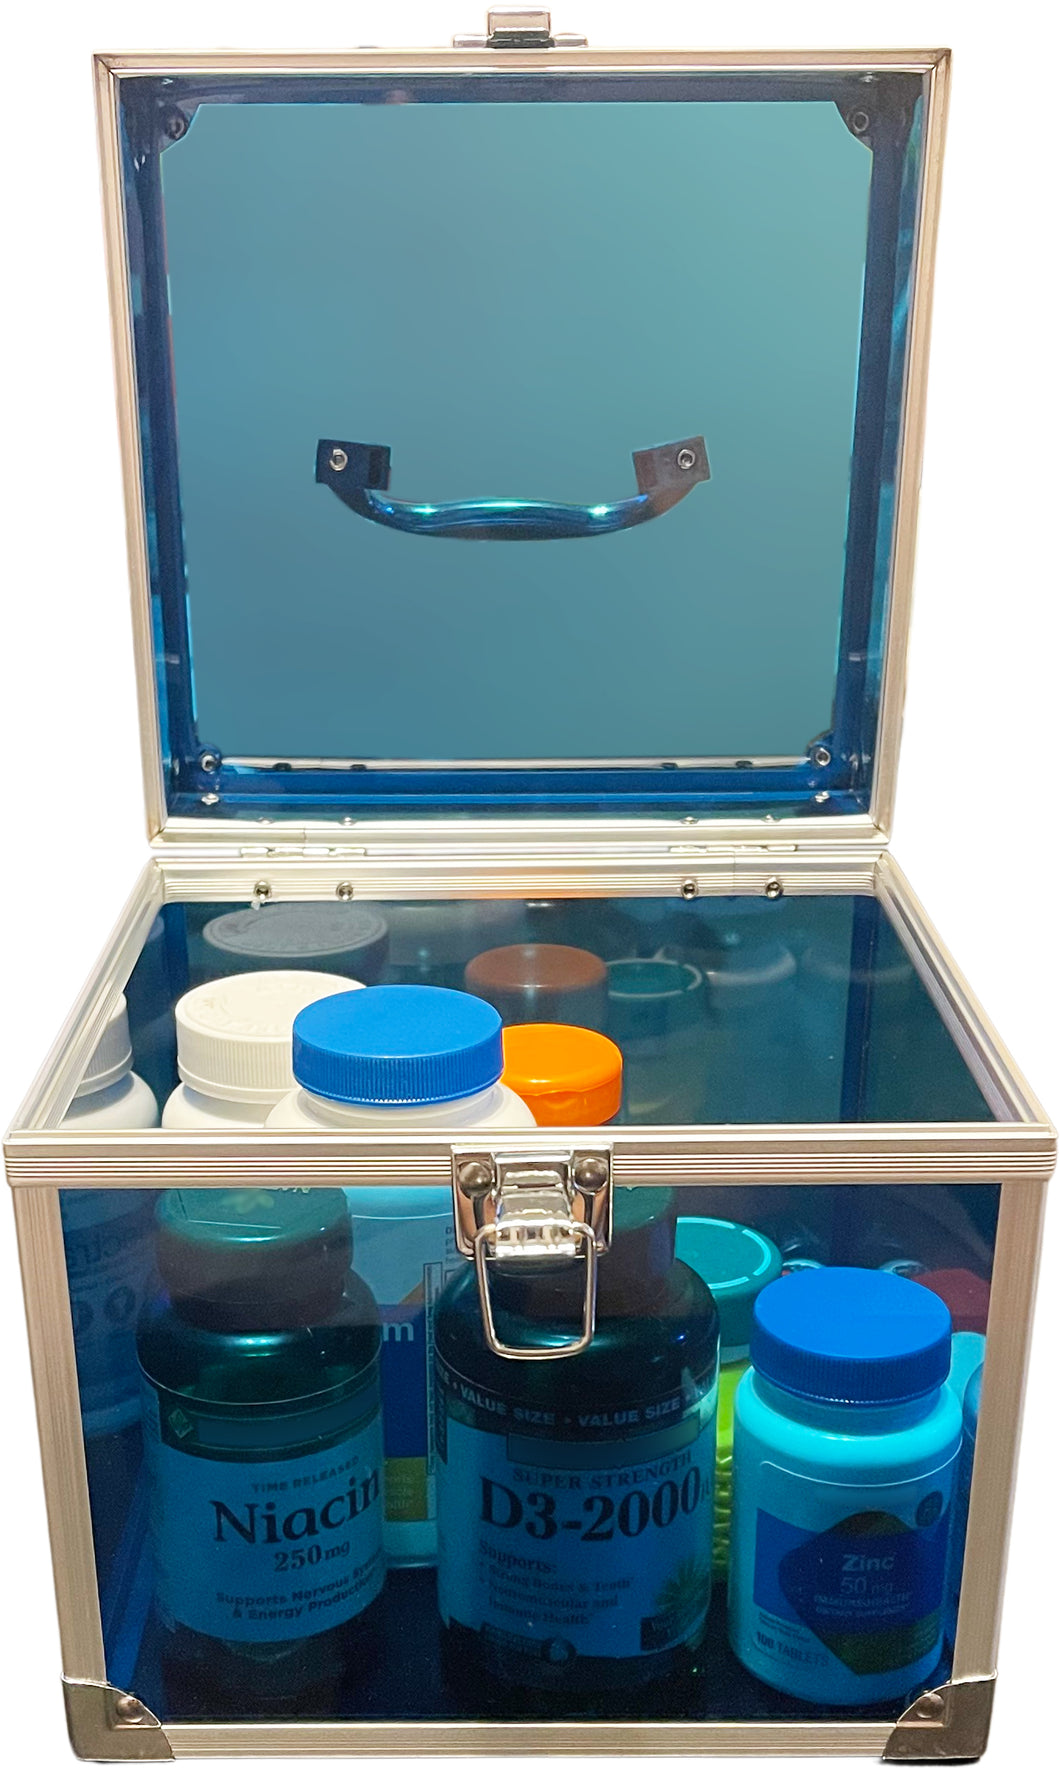 See-through Blue Acrylic and Metal Storage Box Container with Latch and Handle, Measures 7.5